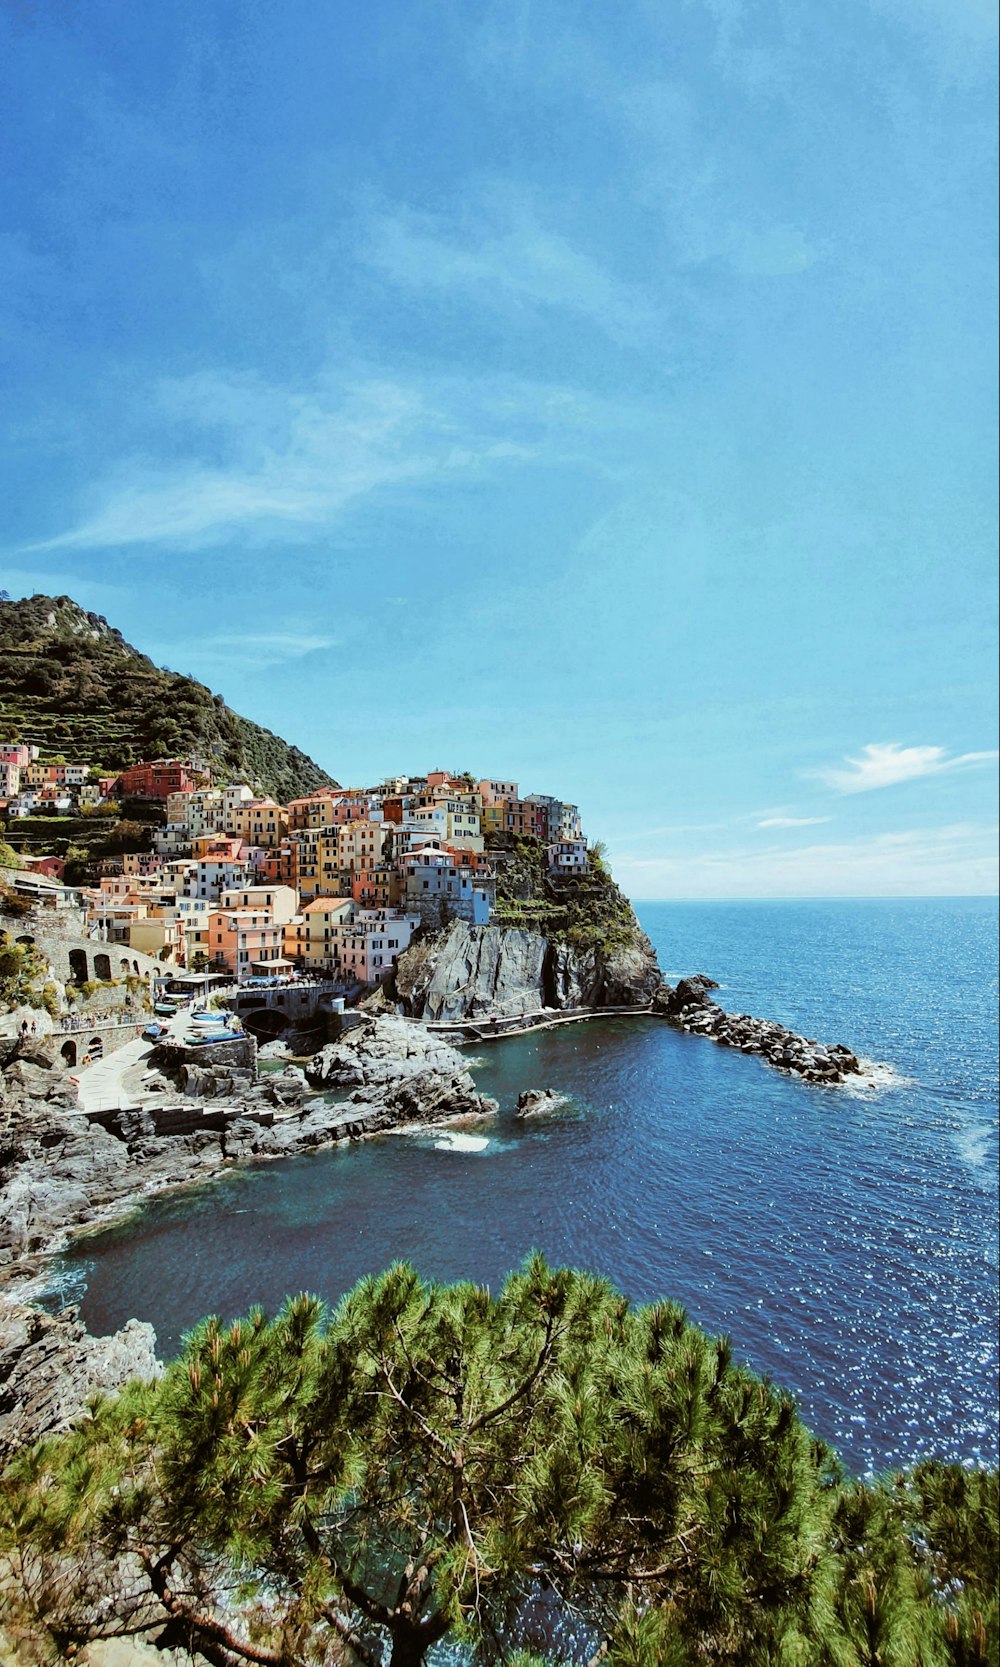 a scenic view of a small town on a cliff overlooking the ocean